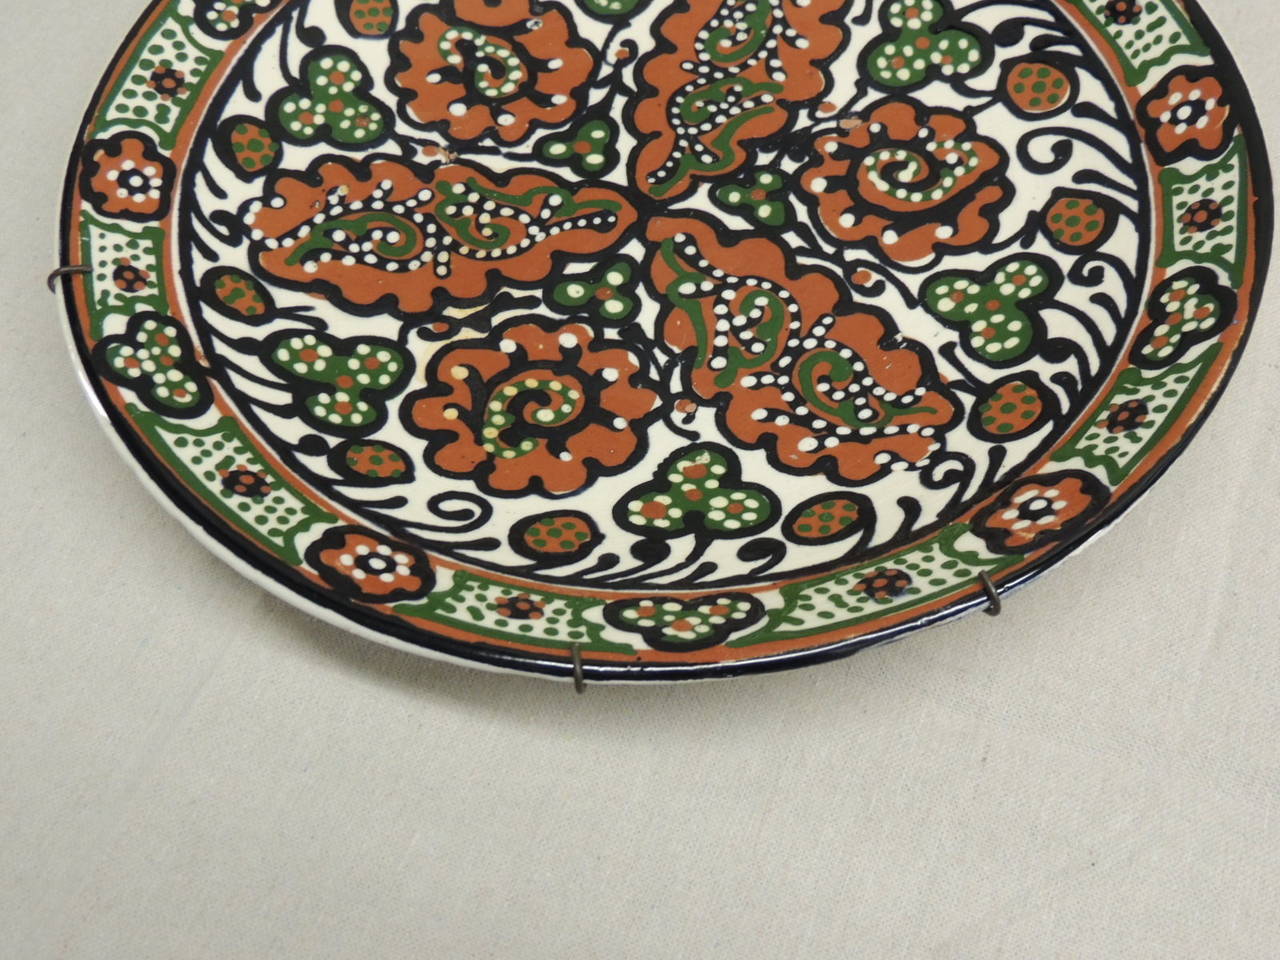 Large glazed ceramic painted plate/charger. Depicting flowers and leaves in shades of orange, green and black. Hanging wires on back.